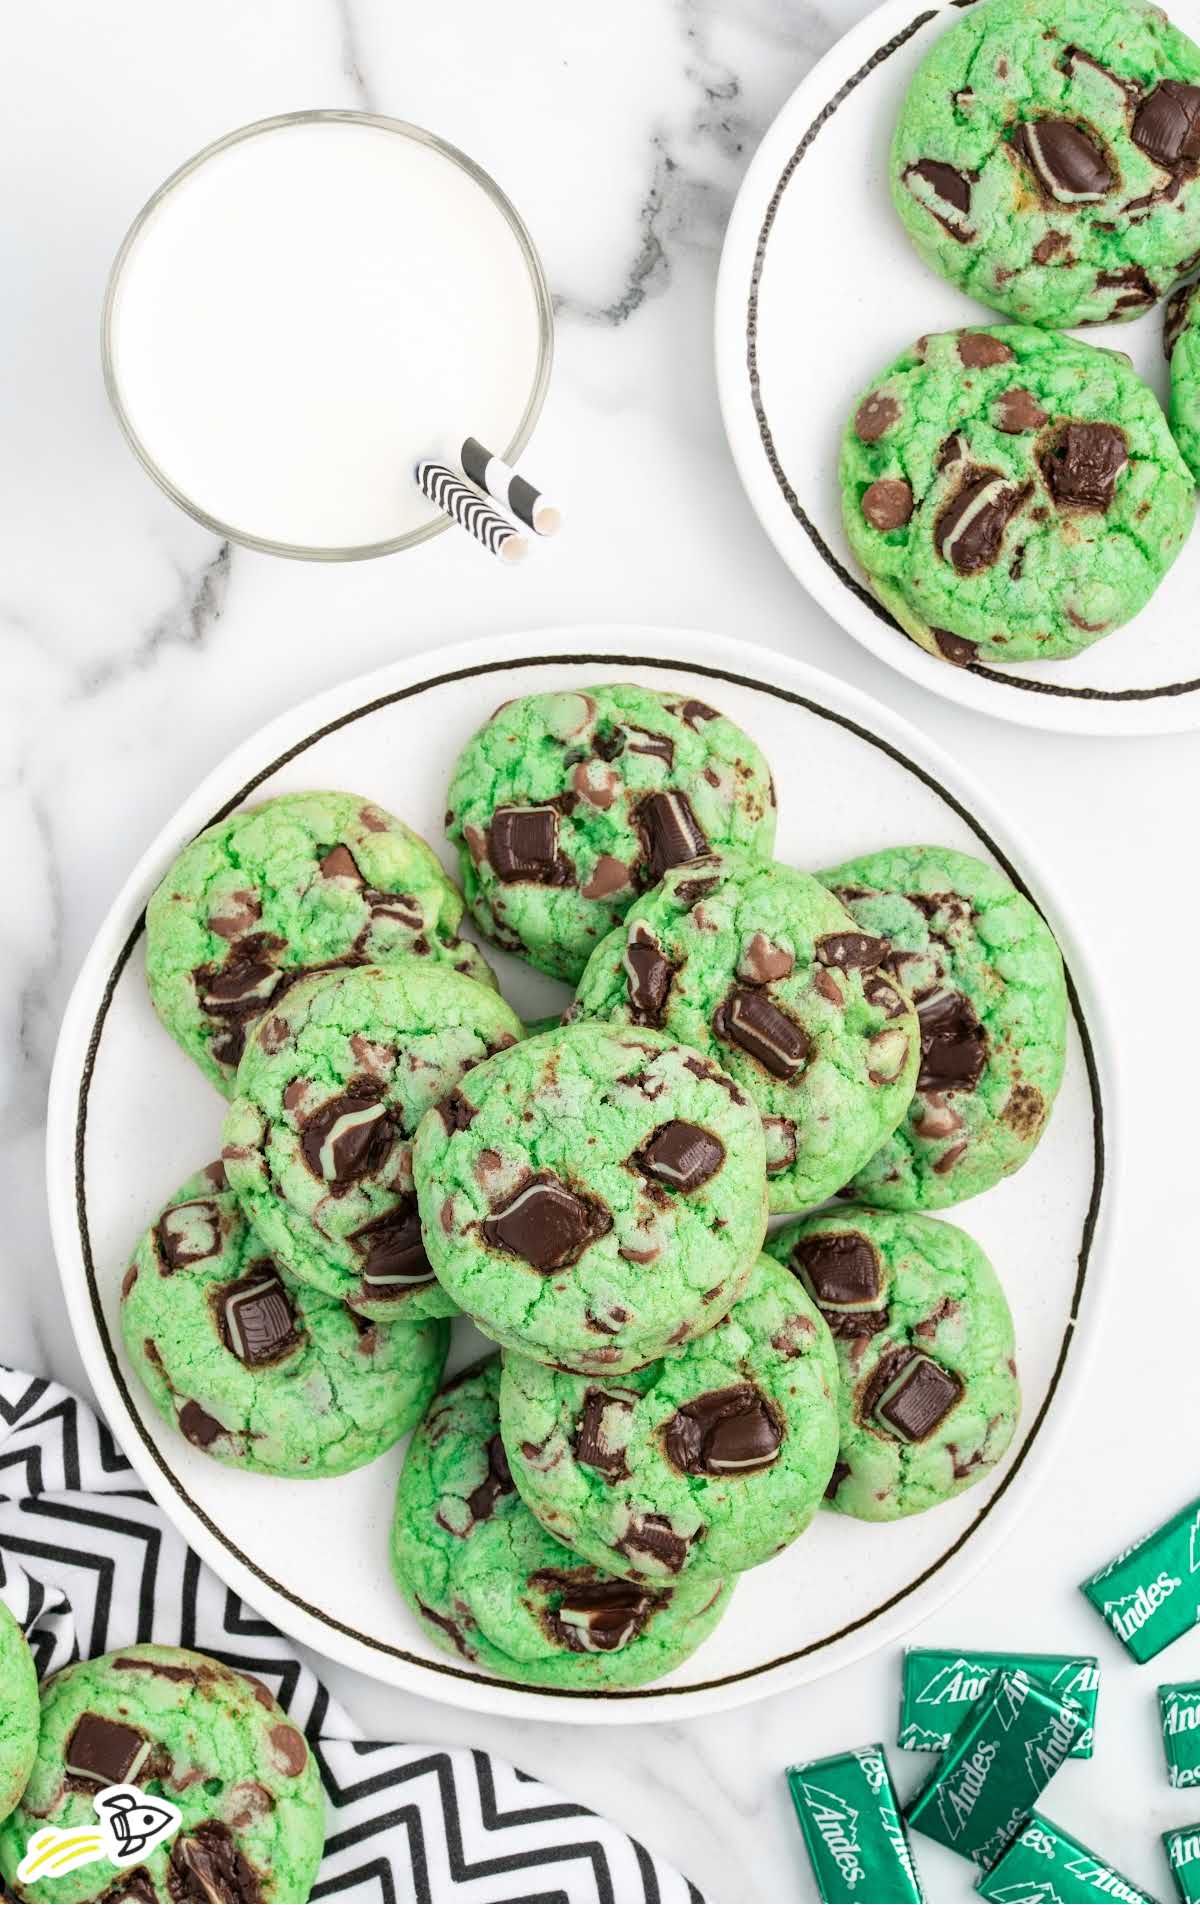 overhead shot of Mint Chocolate Chip Cookies on a plate